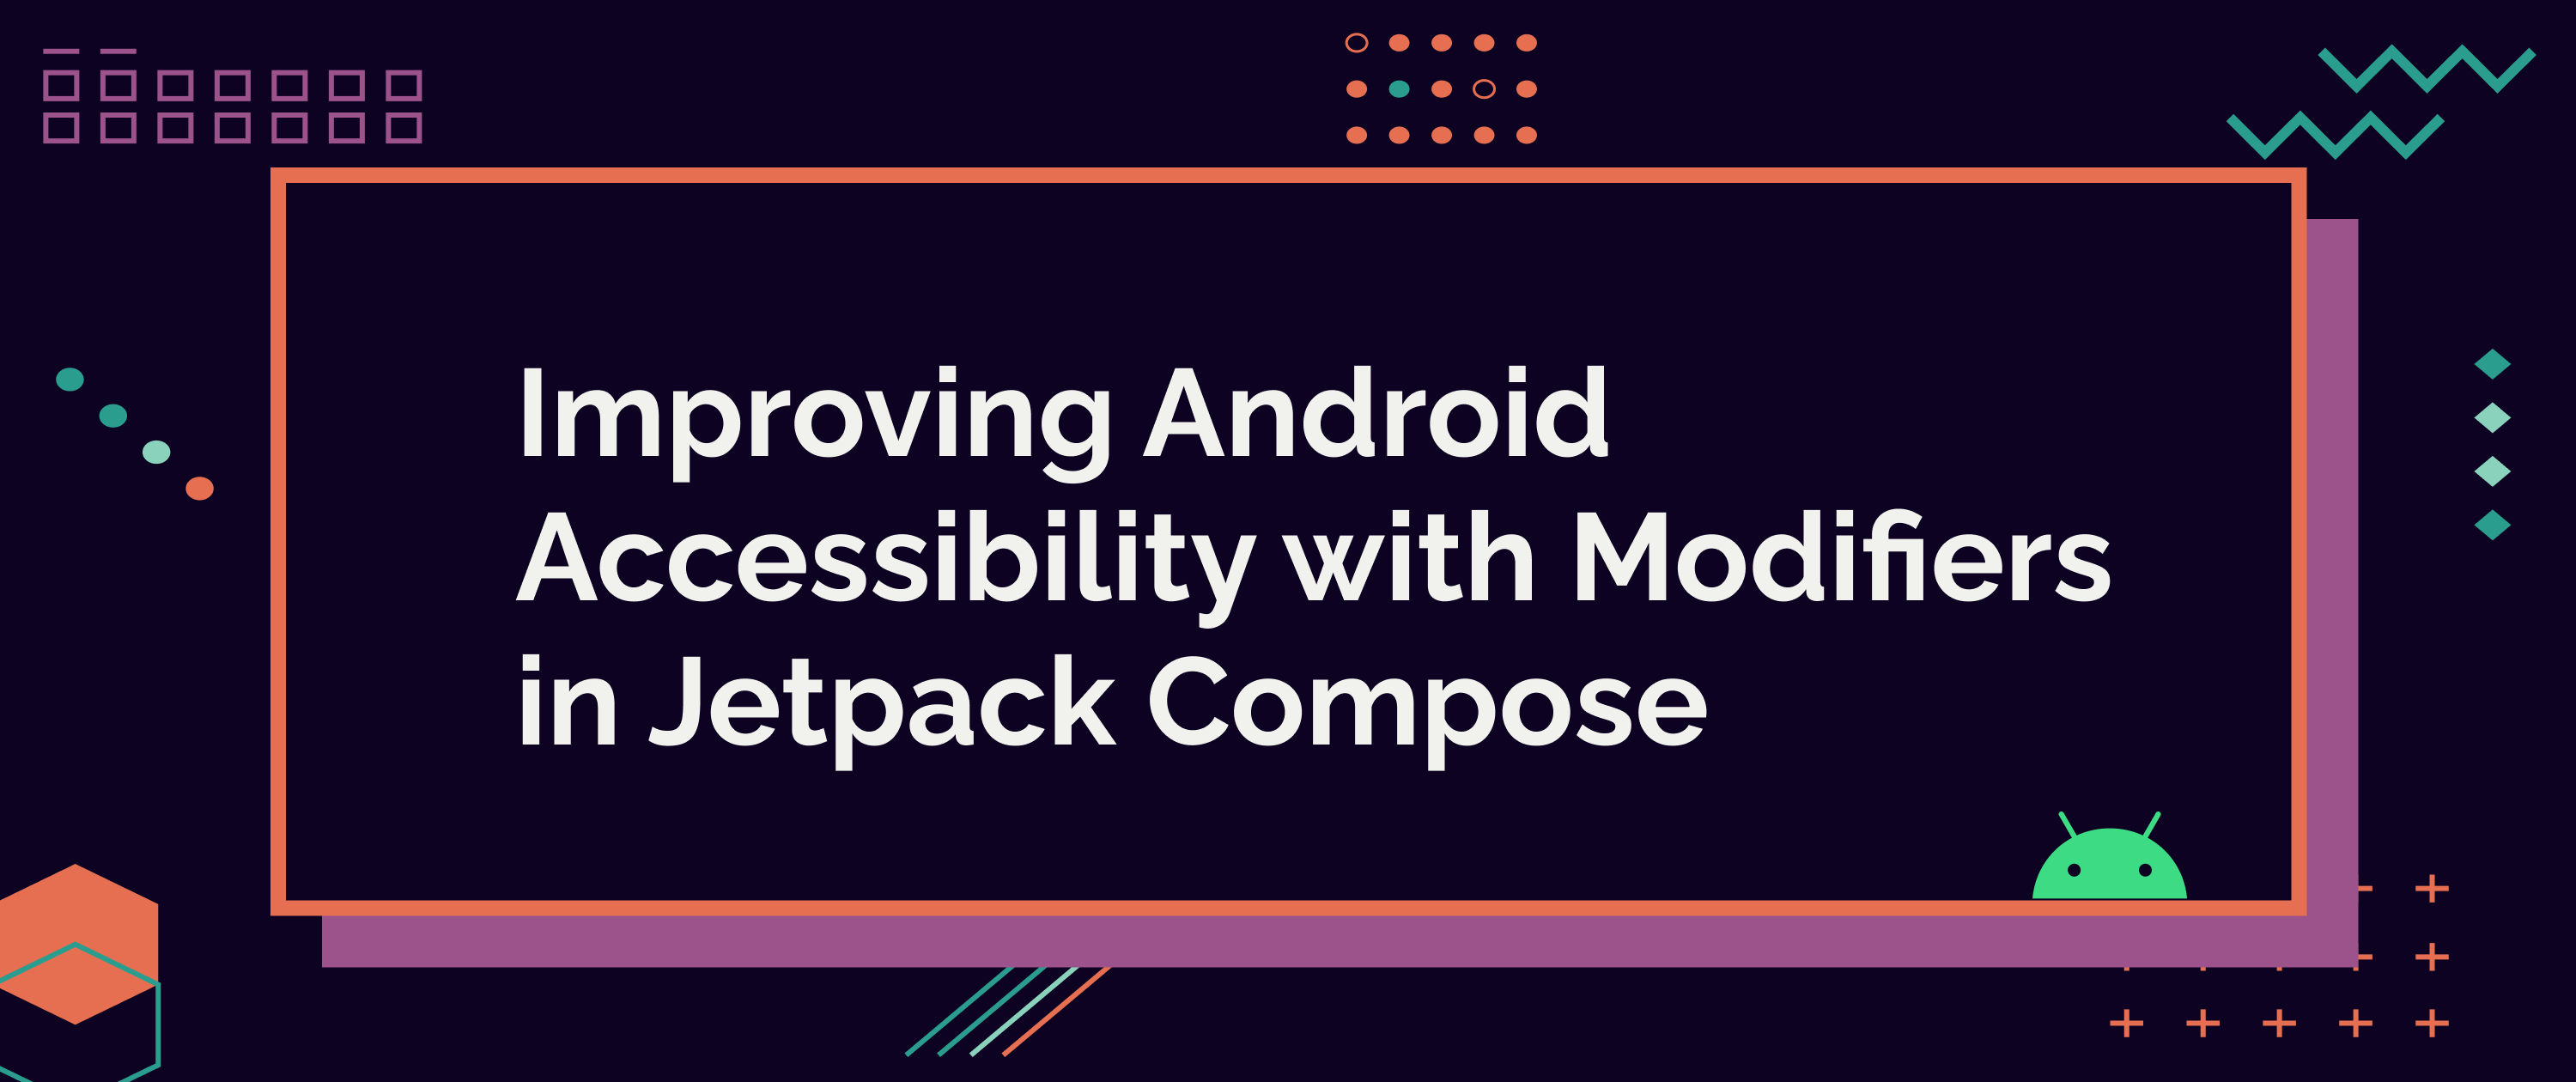 Improving Android Accessibility with Modifiers in Jetpack Compose